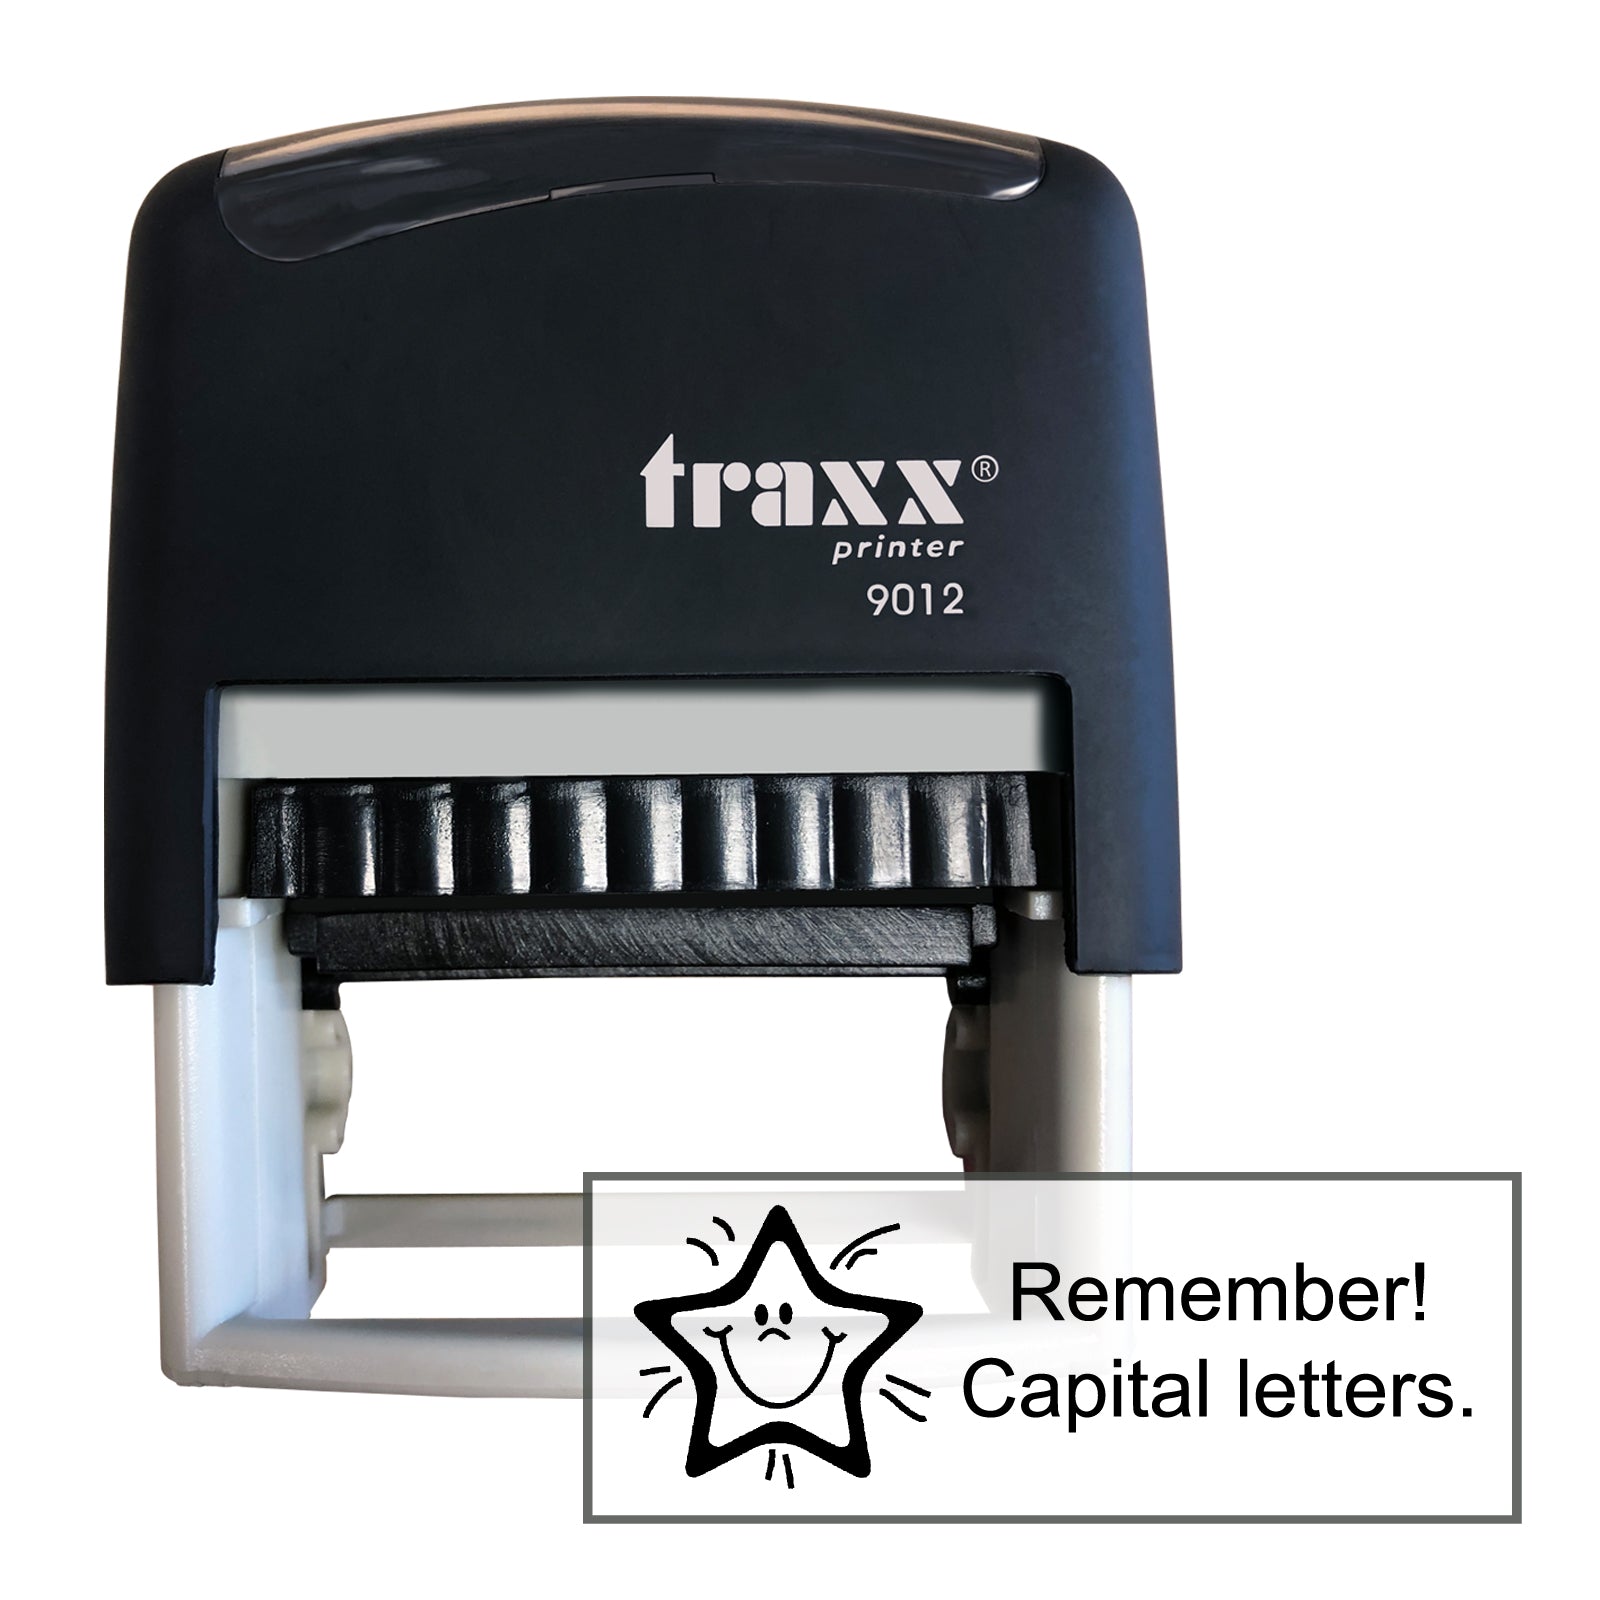 Traxx 9012 48 x 18mm Assessment Stamp - Remember Capital letters